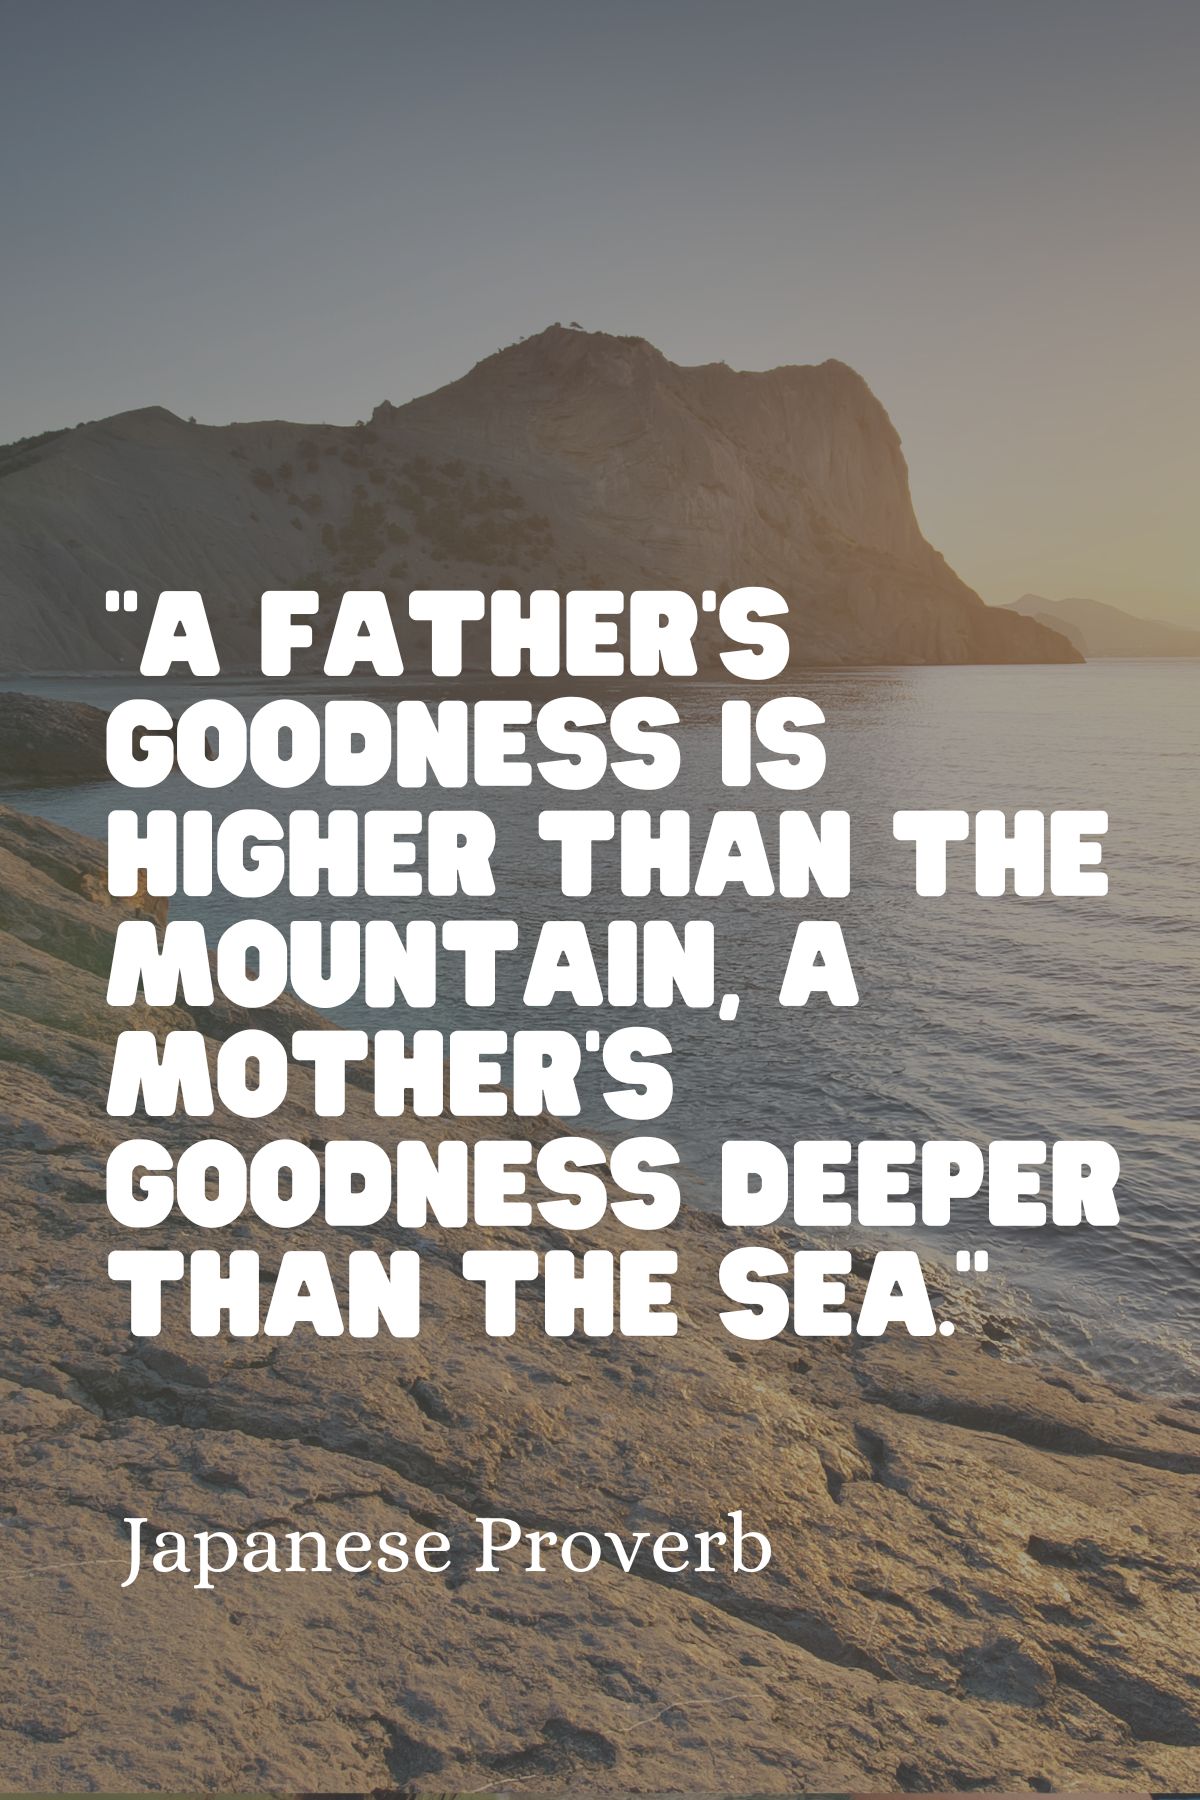 “A father’s goodness is higher than the mountain, a mother’s goodness deeper than the sea.” - Japanese Proverb loving your parents quote